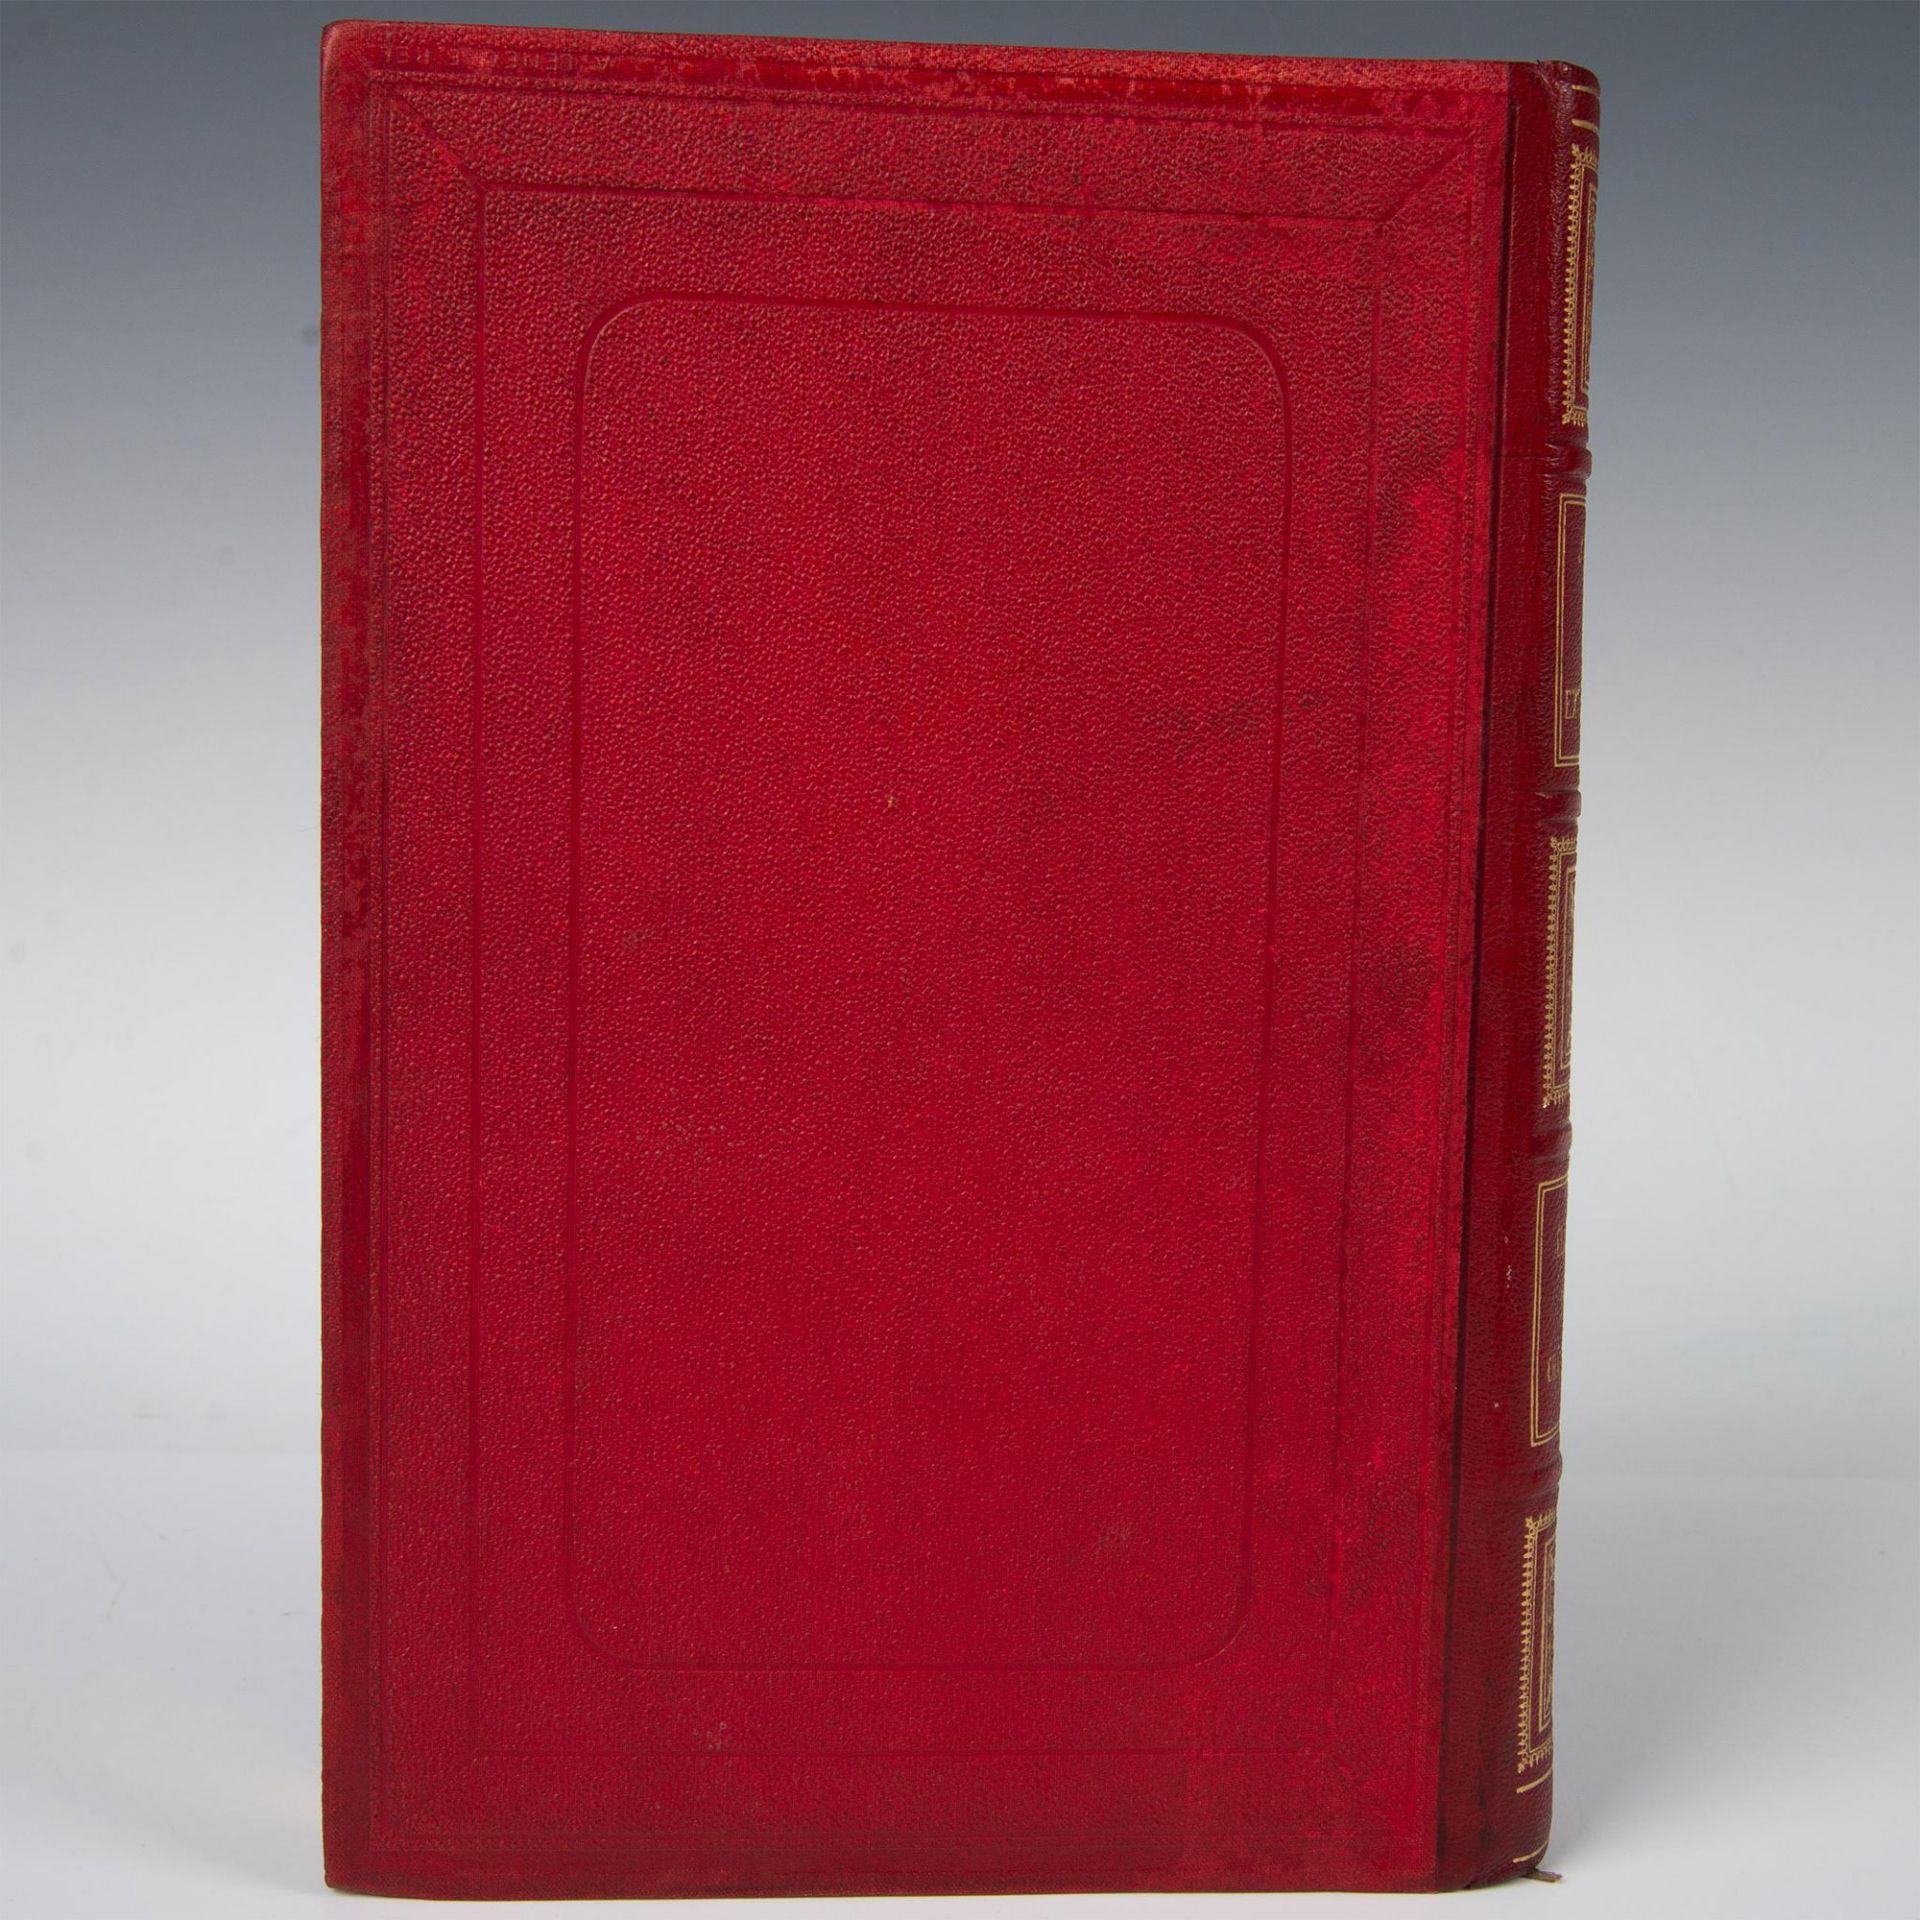 Jules Verne, Bombarnac/Carpathes, Aux Harpons, Red Cover - Image 3 of 9